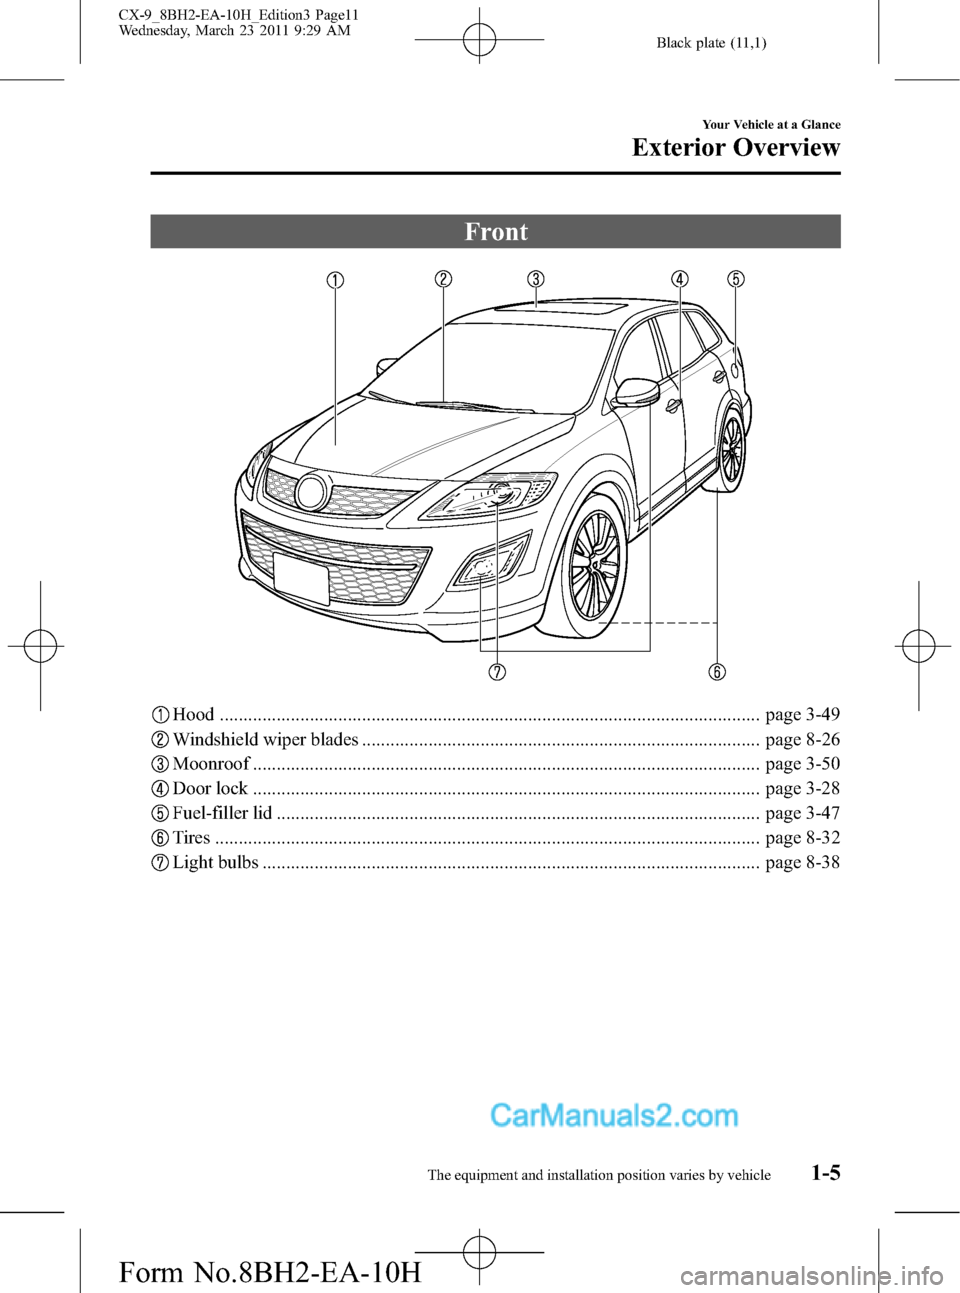 MAZDA MODEL CX-9 2011  Owners Manual (in English) Black plate (11,1)
Front
Hood .................................................................................................................. page 3-49
Windshield wiper blades .....................